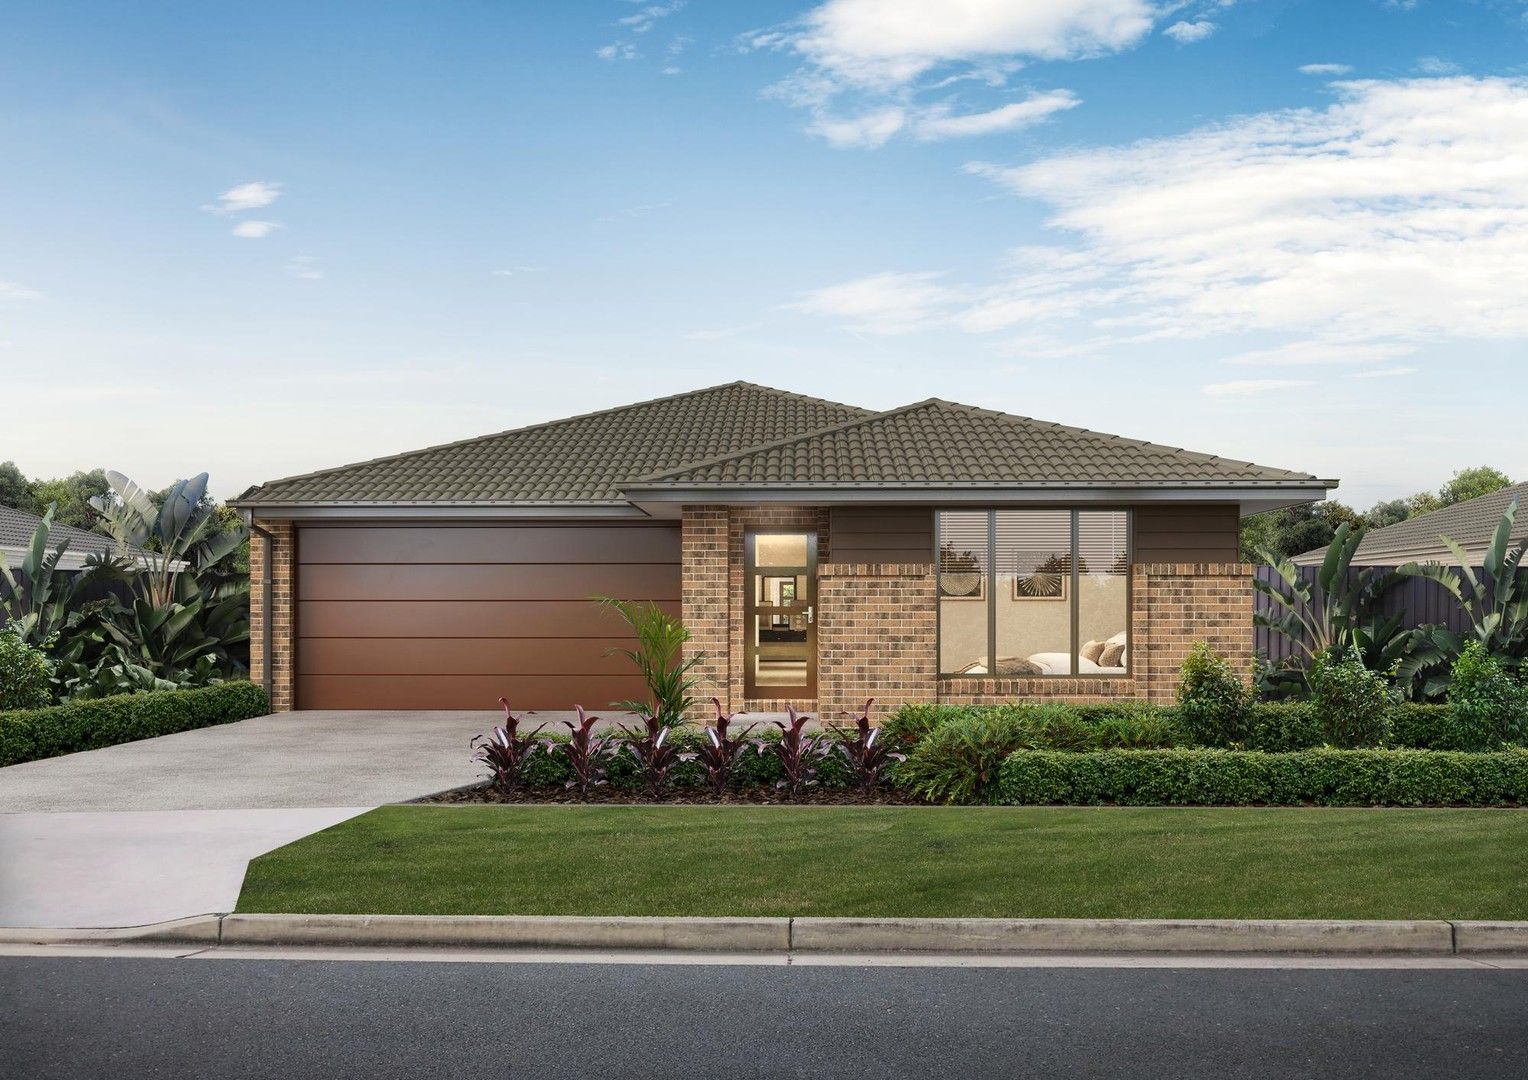 3 bedrooms New House & Land in 617 The Reserve Estate CHARLEMONT VIC, 3217